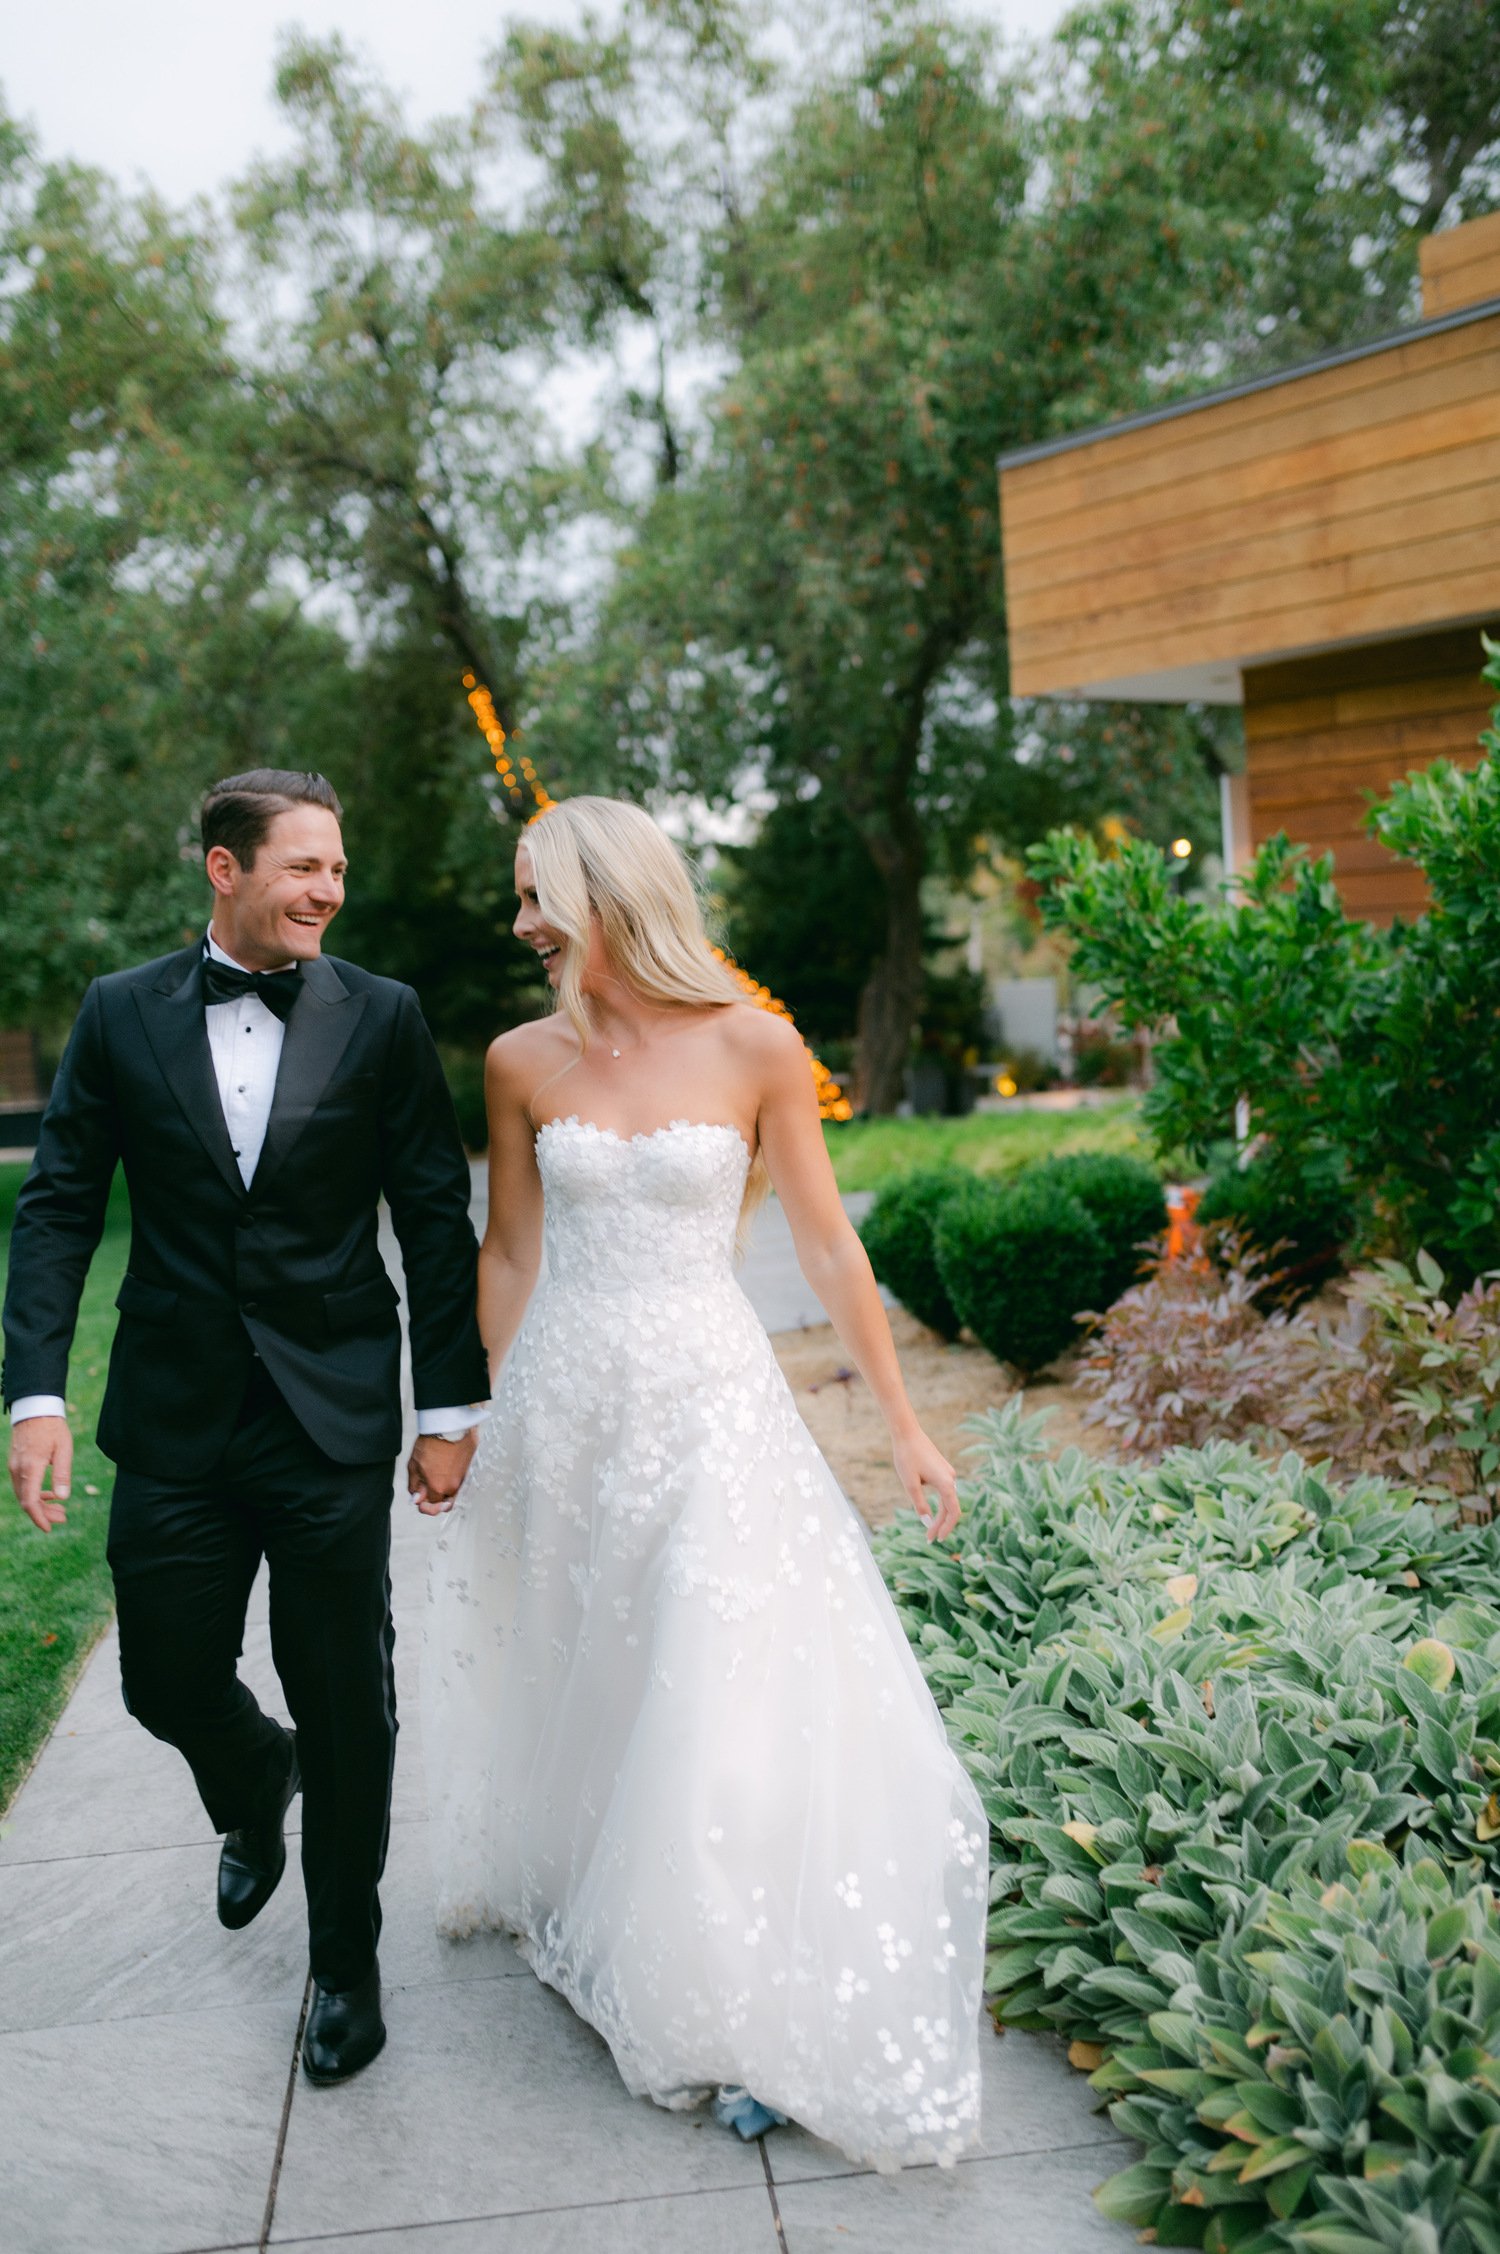 Elm Estate Wedding photos, photo of the bride and groom walking outdoors holding hands